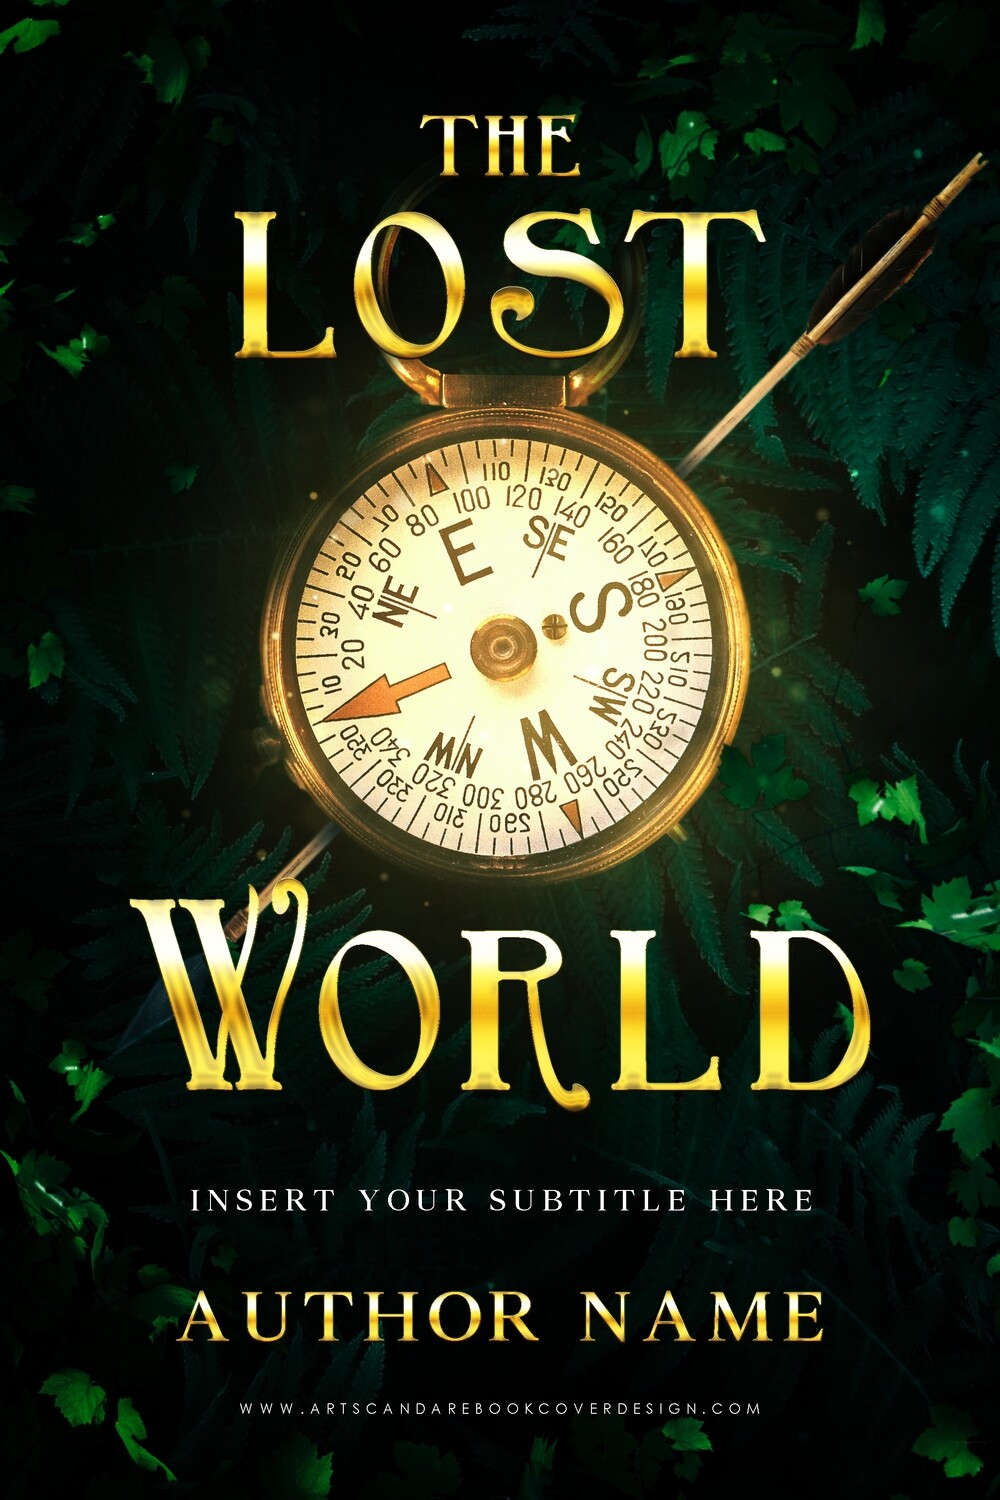 Ebook: The Lost World